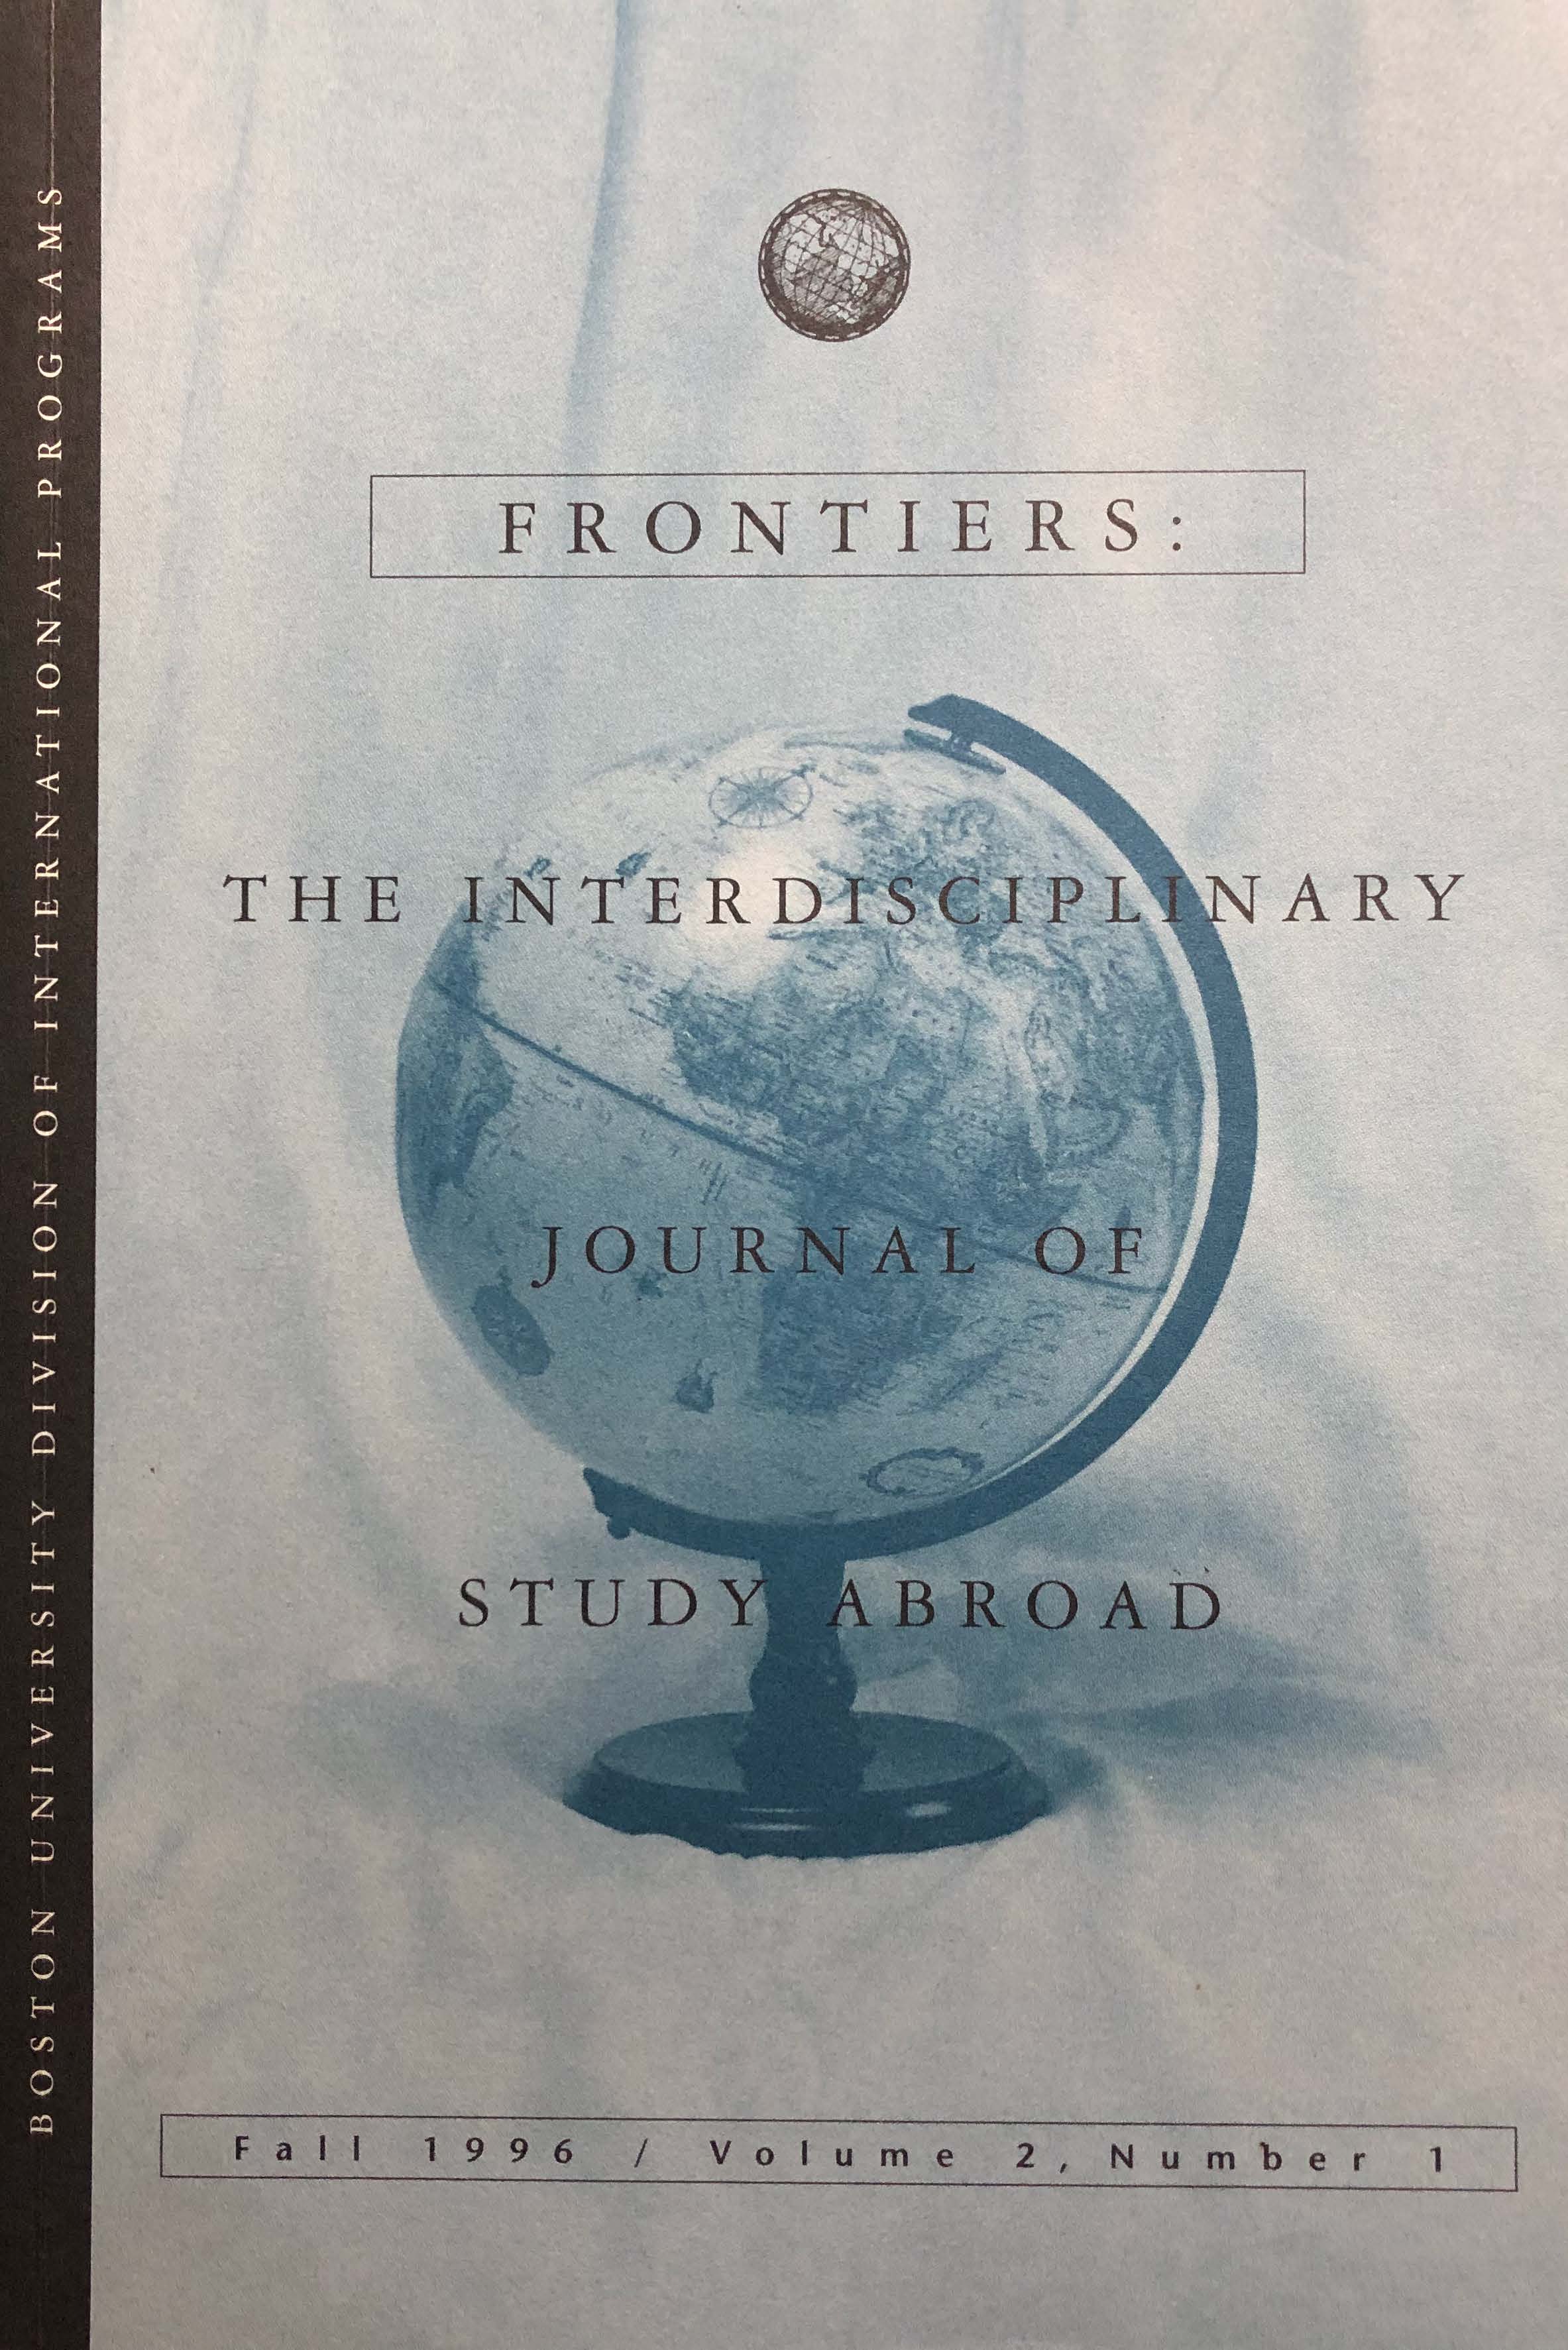 Frontiers: The Interdisciplinary Journal of Study Abroad